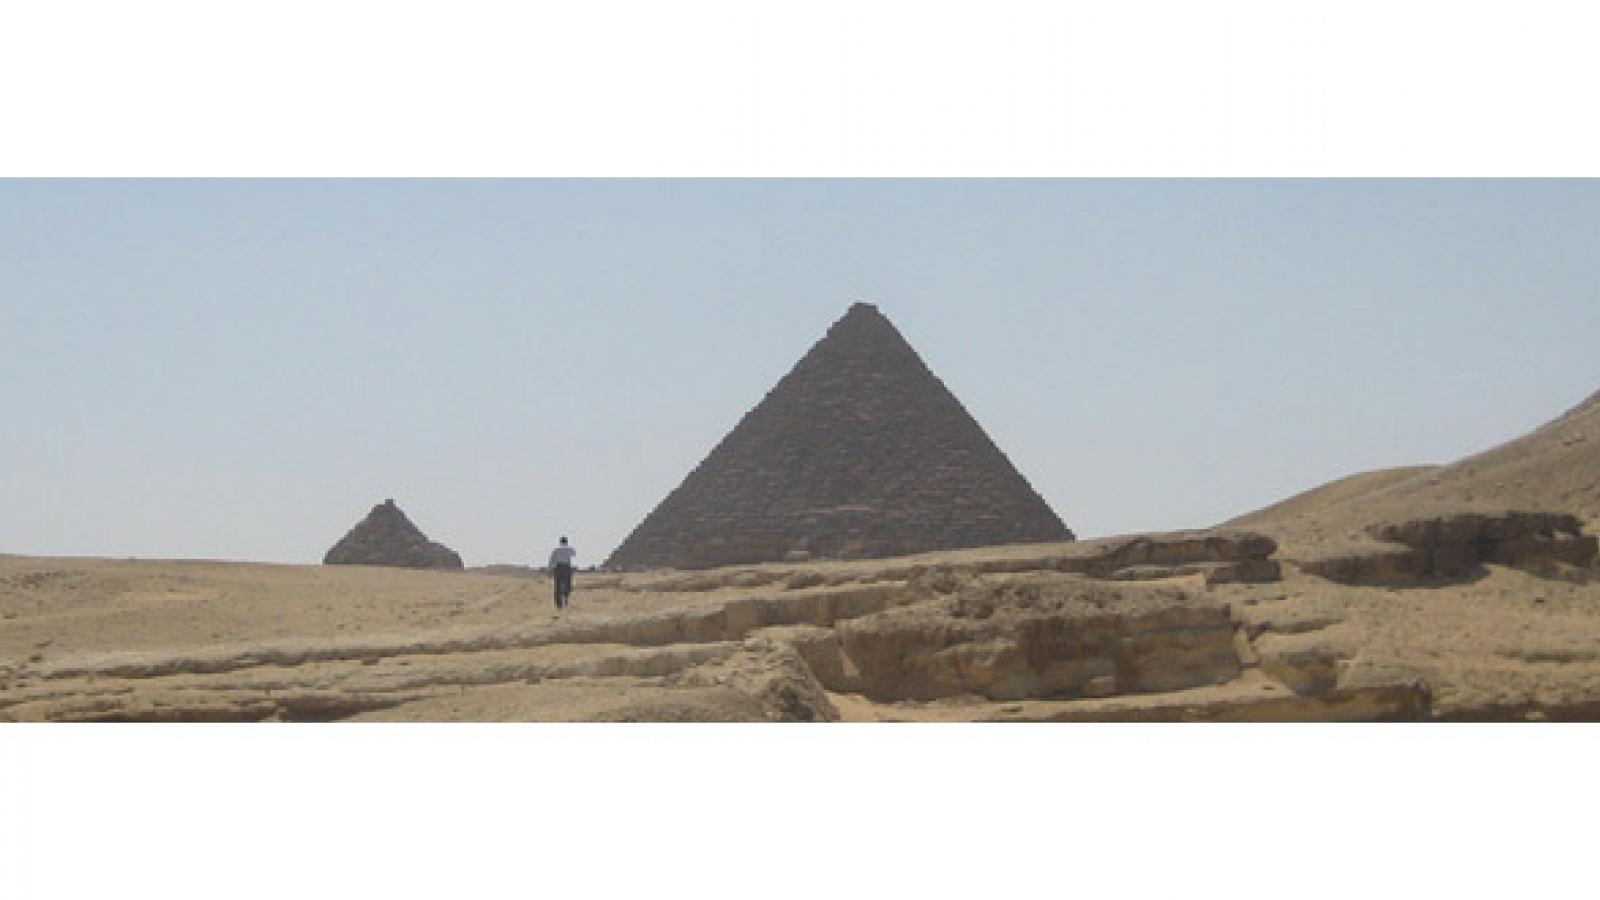 A pyramid in Egypt.